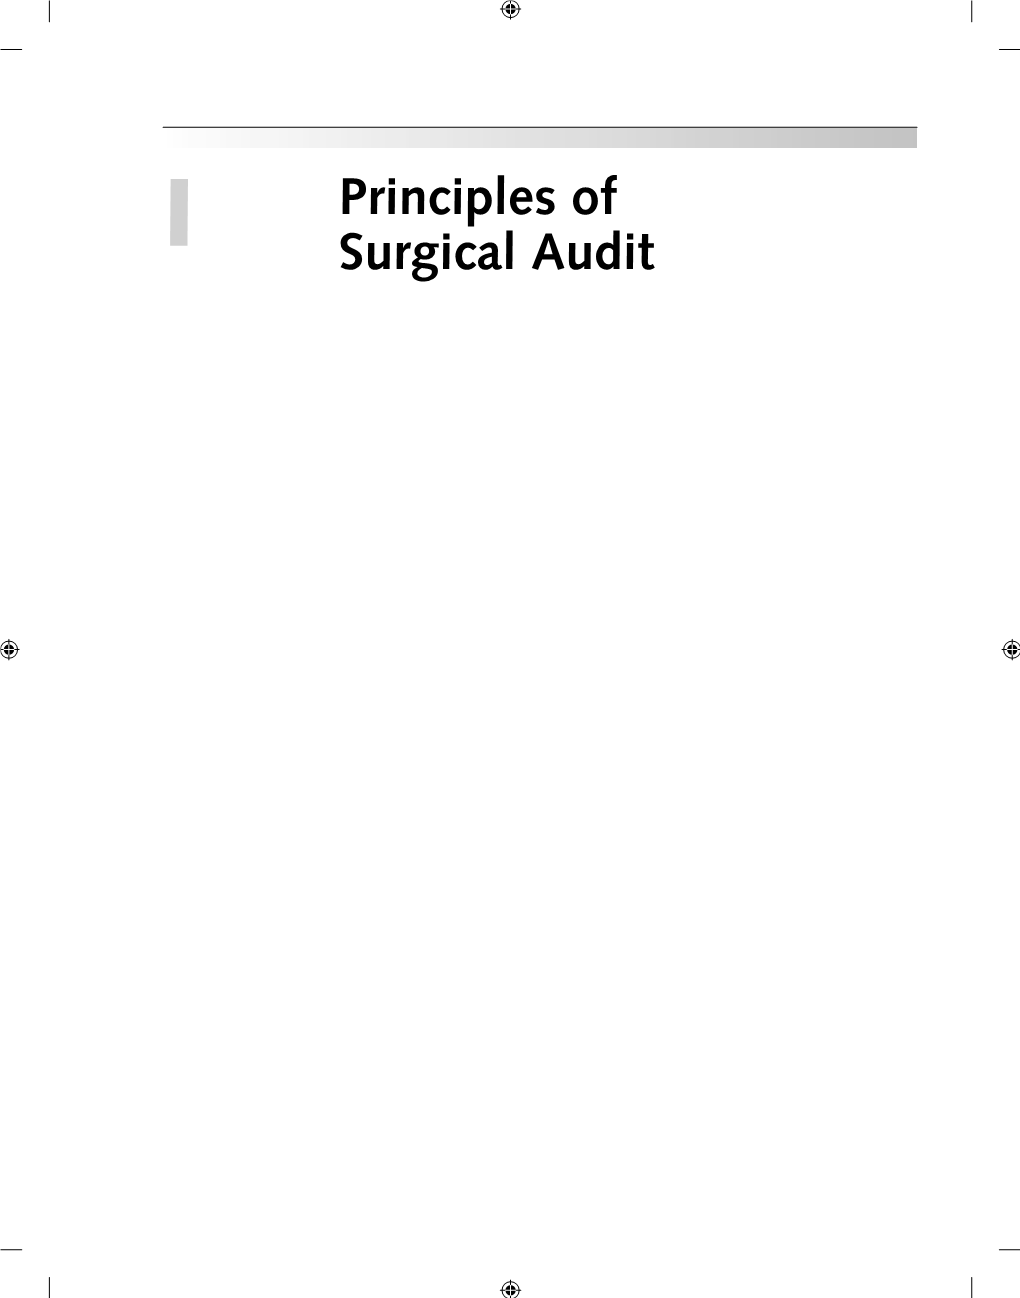 Principles of Surgical Audit